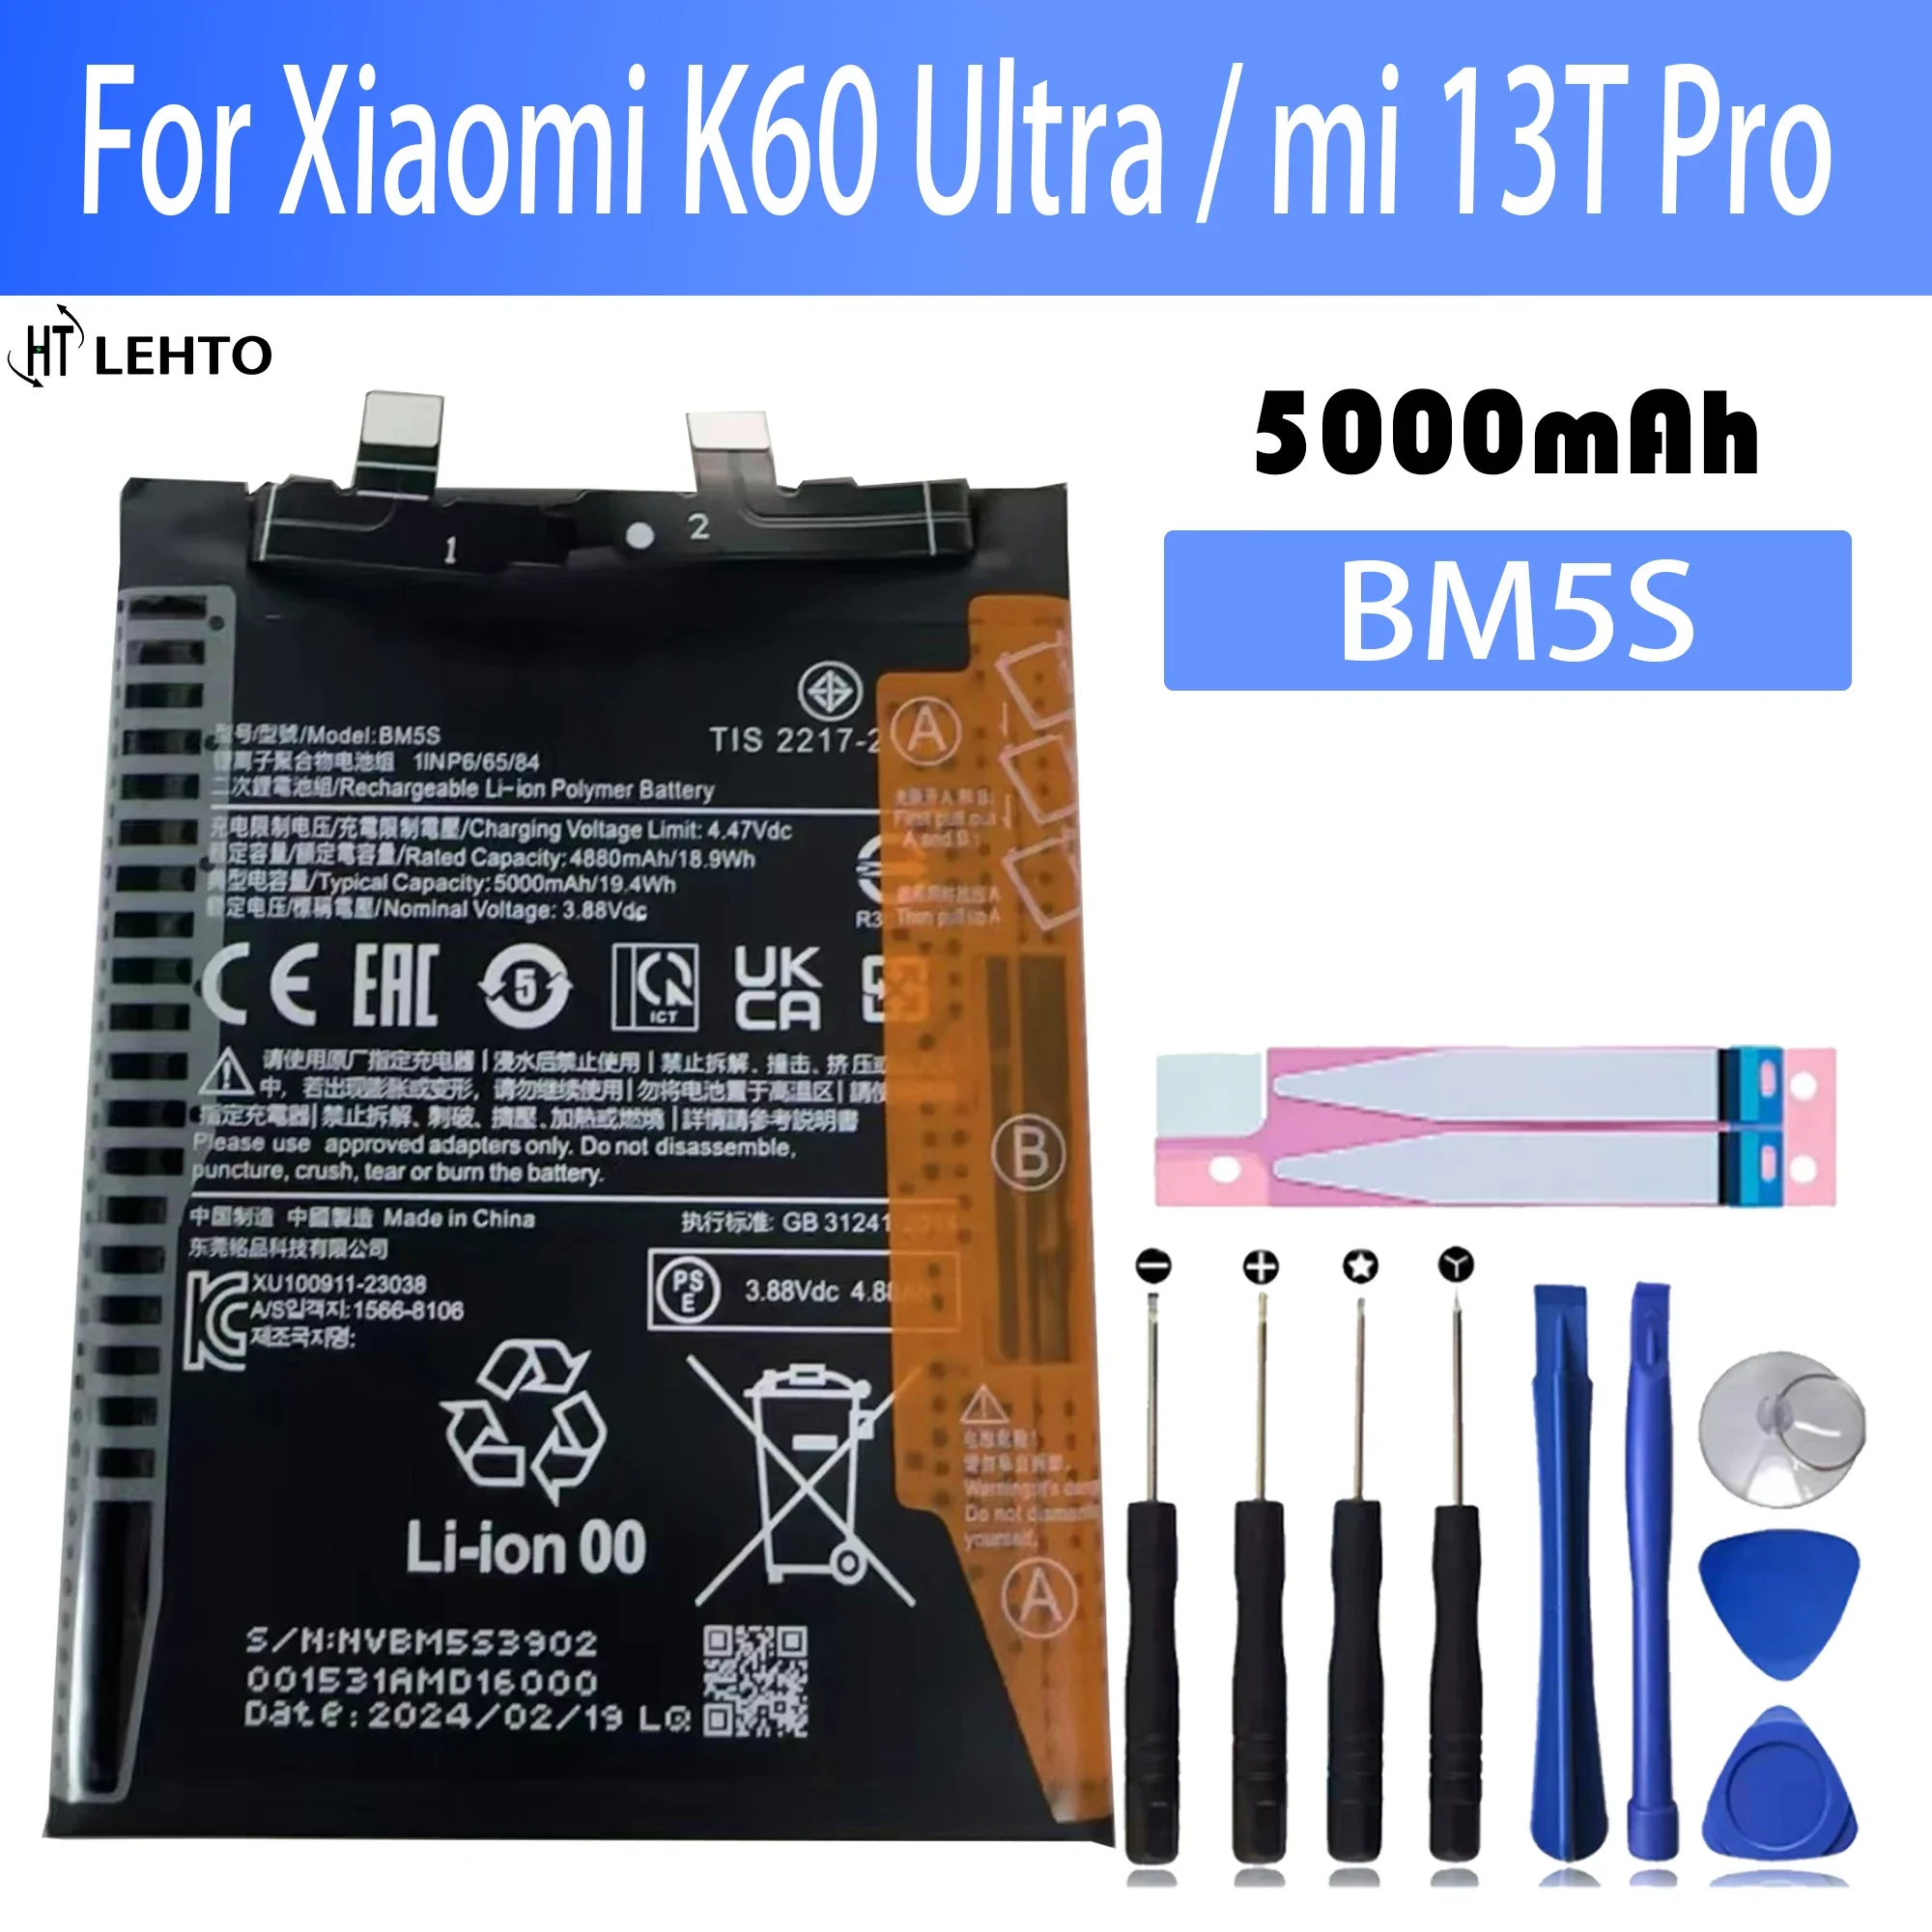 

100% New Replacement Original Battery BM5S For Xiaomi K60 Ultra / mi 13T Pro Phone Battery+Tools